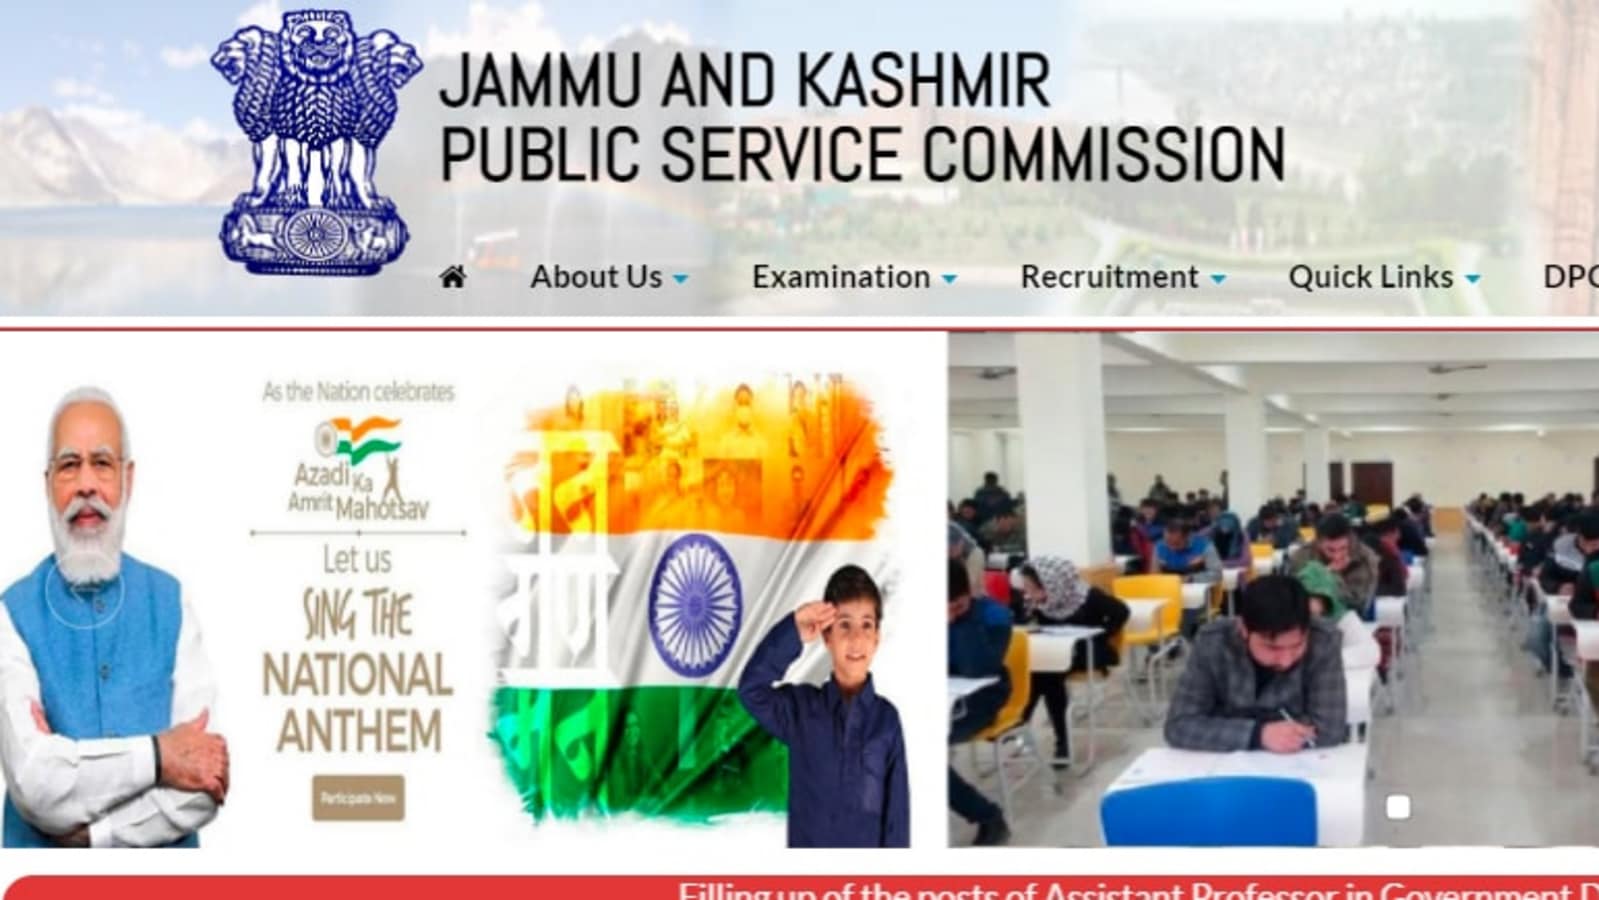 JKPSC CCE Main Exam 2022: Notification released at jkpsc.nic.in, details here